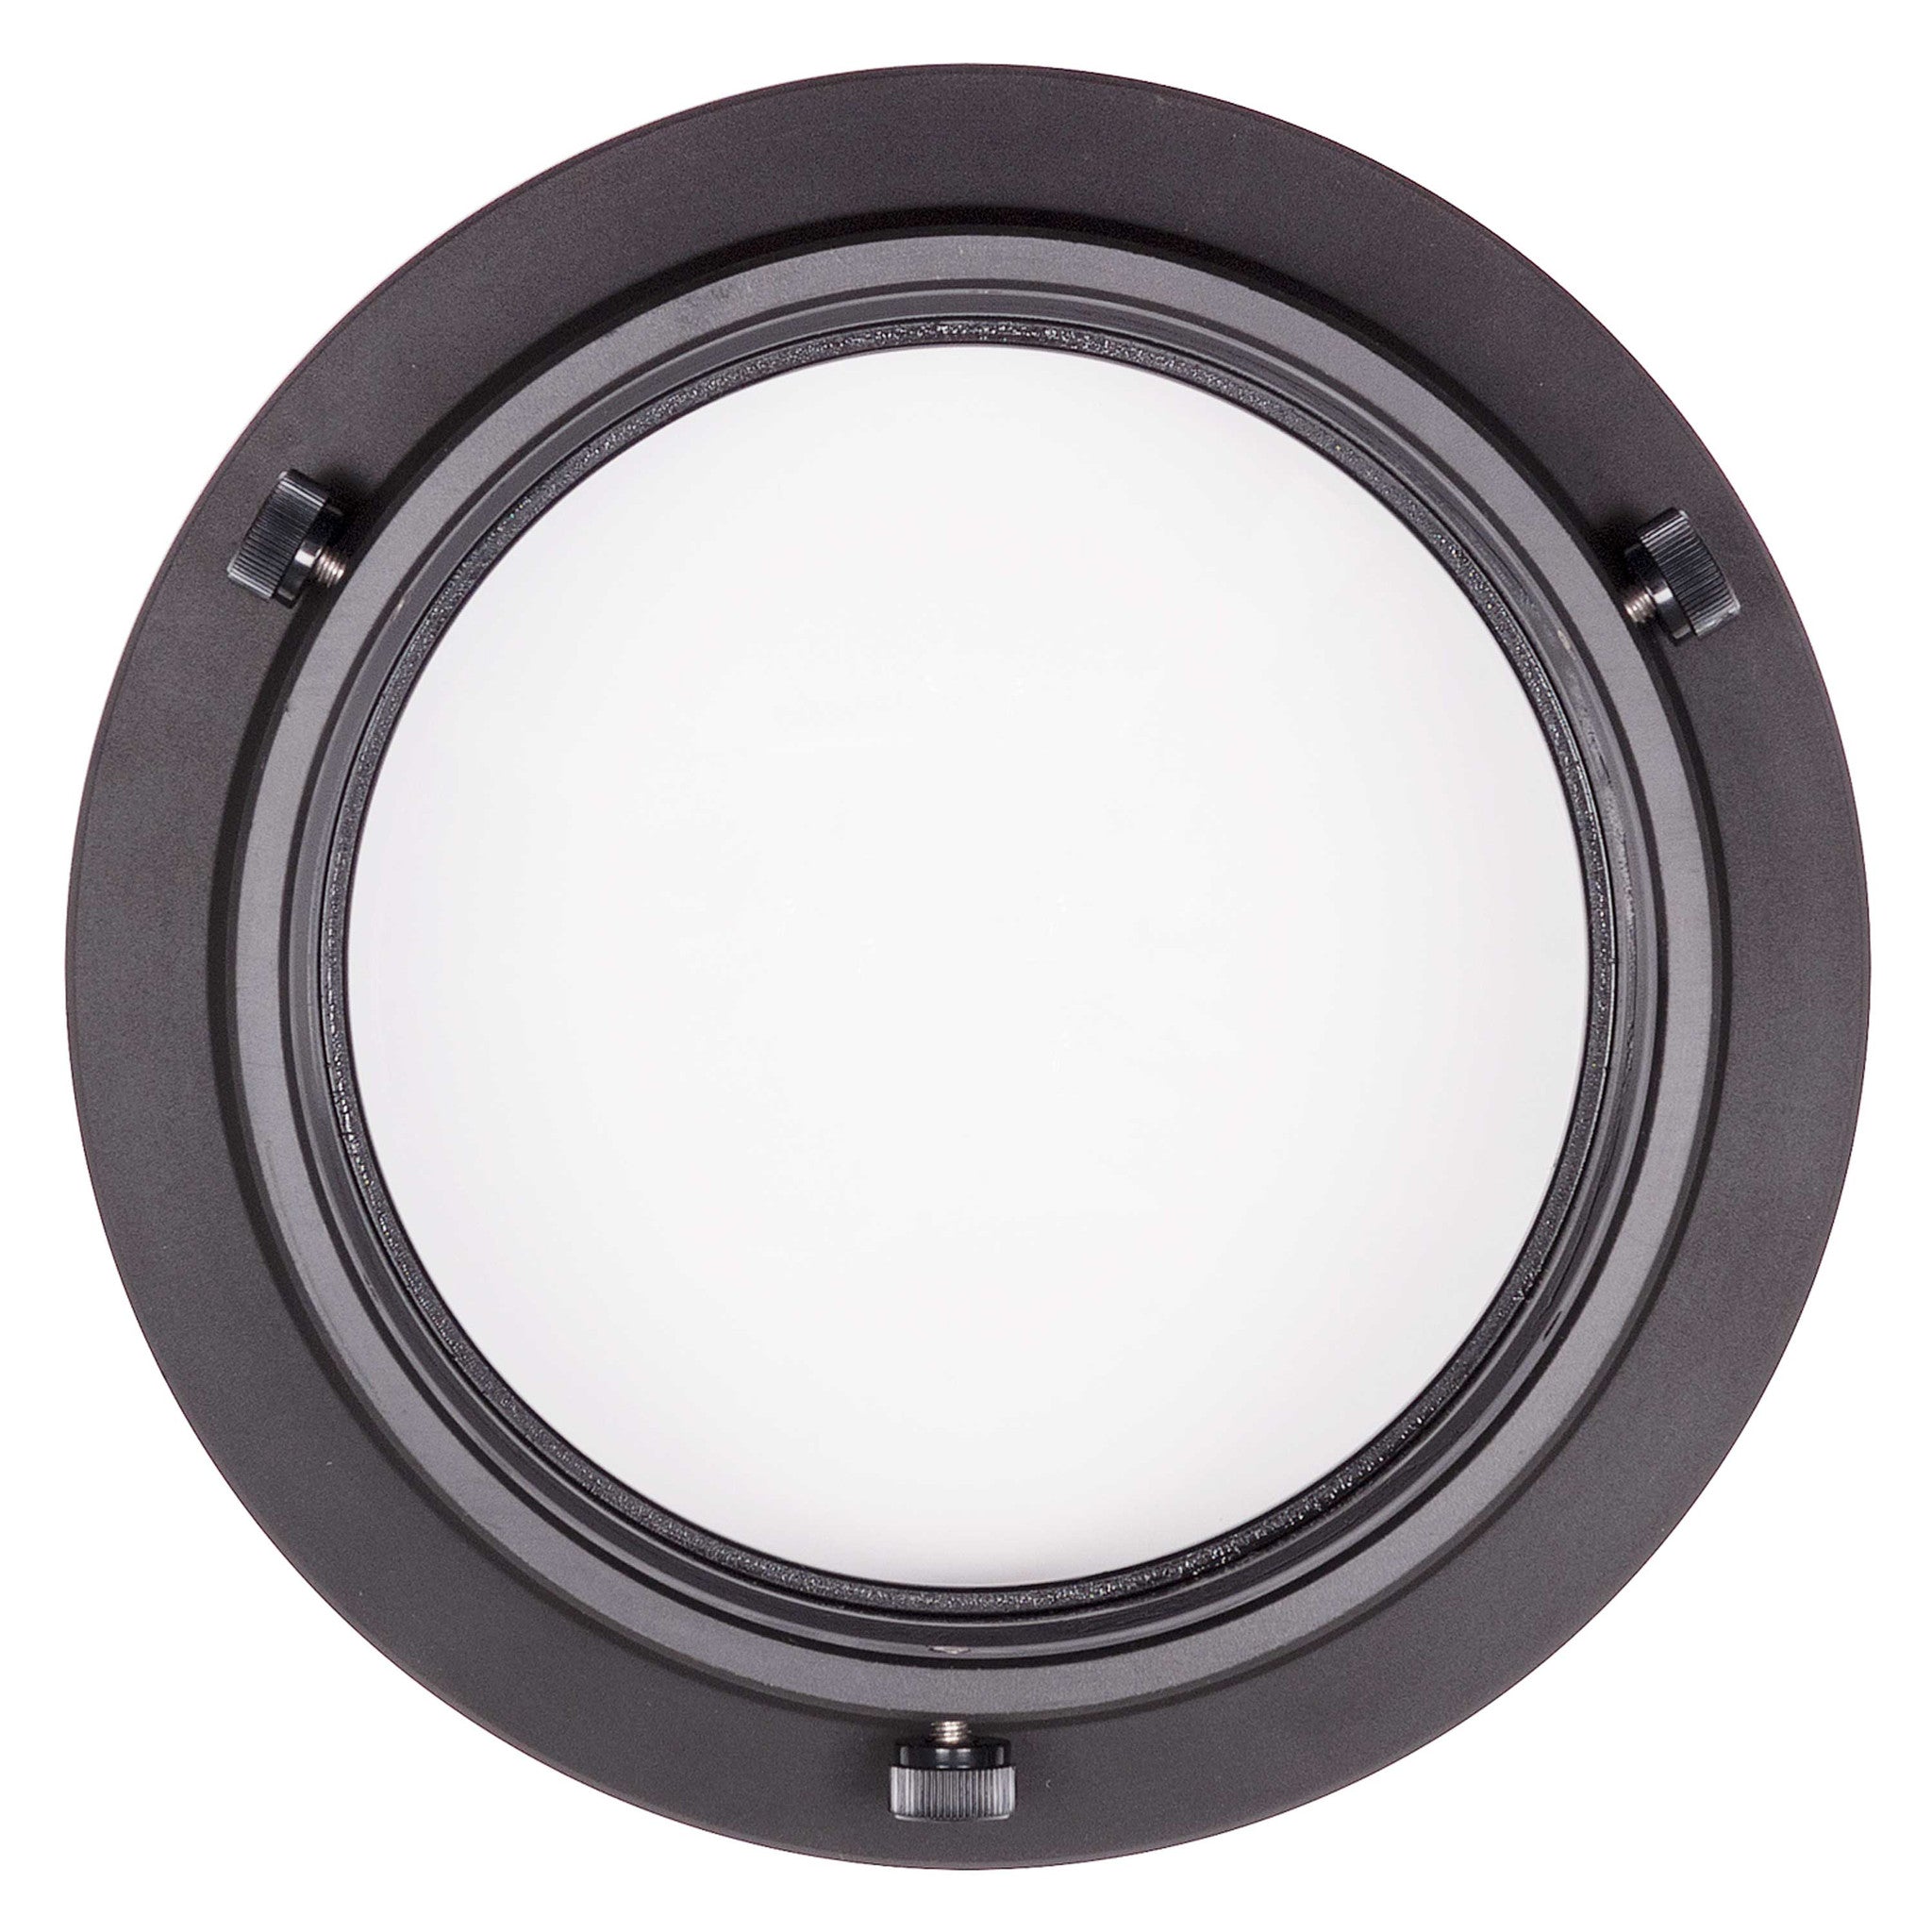 DLM Superwide 6 inch Dome Port